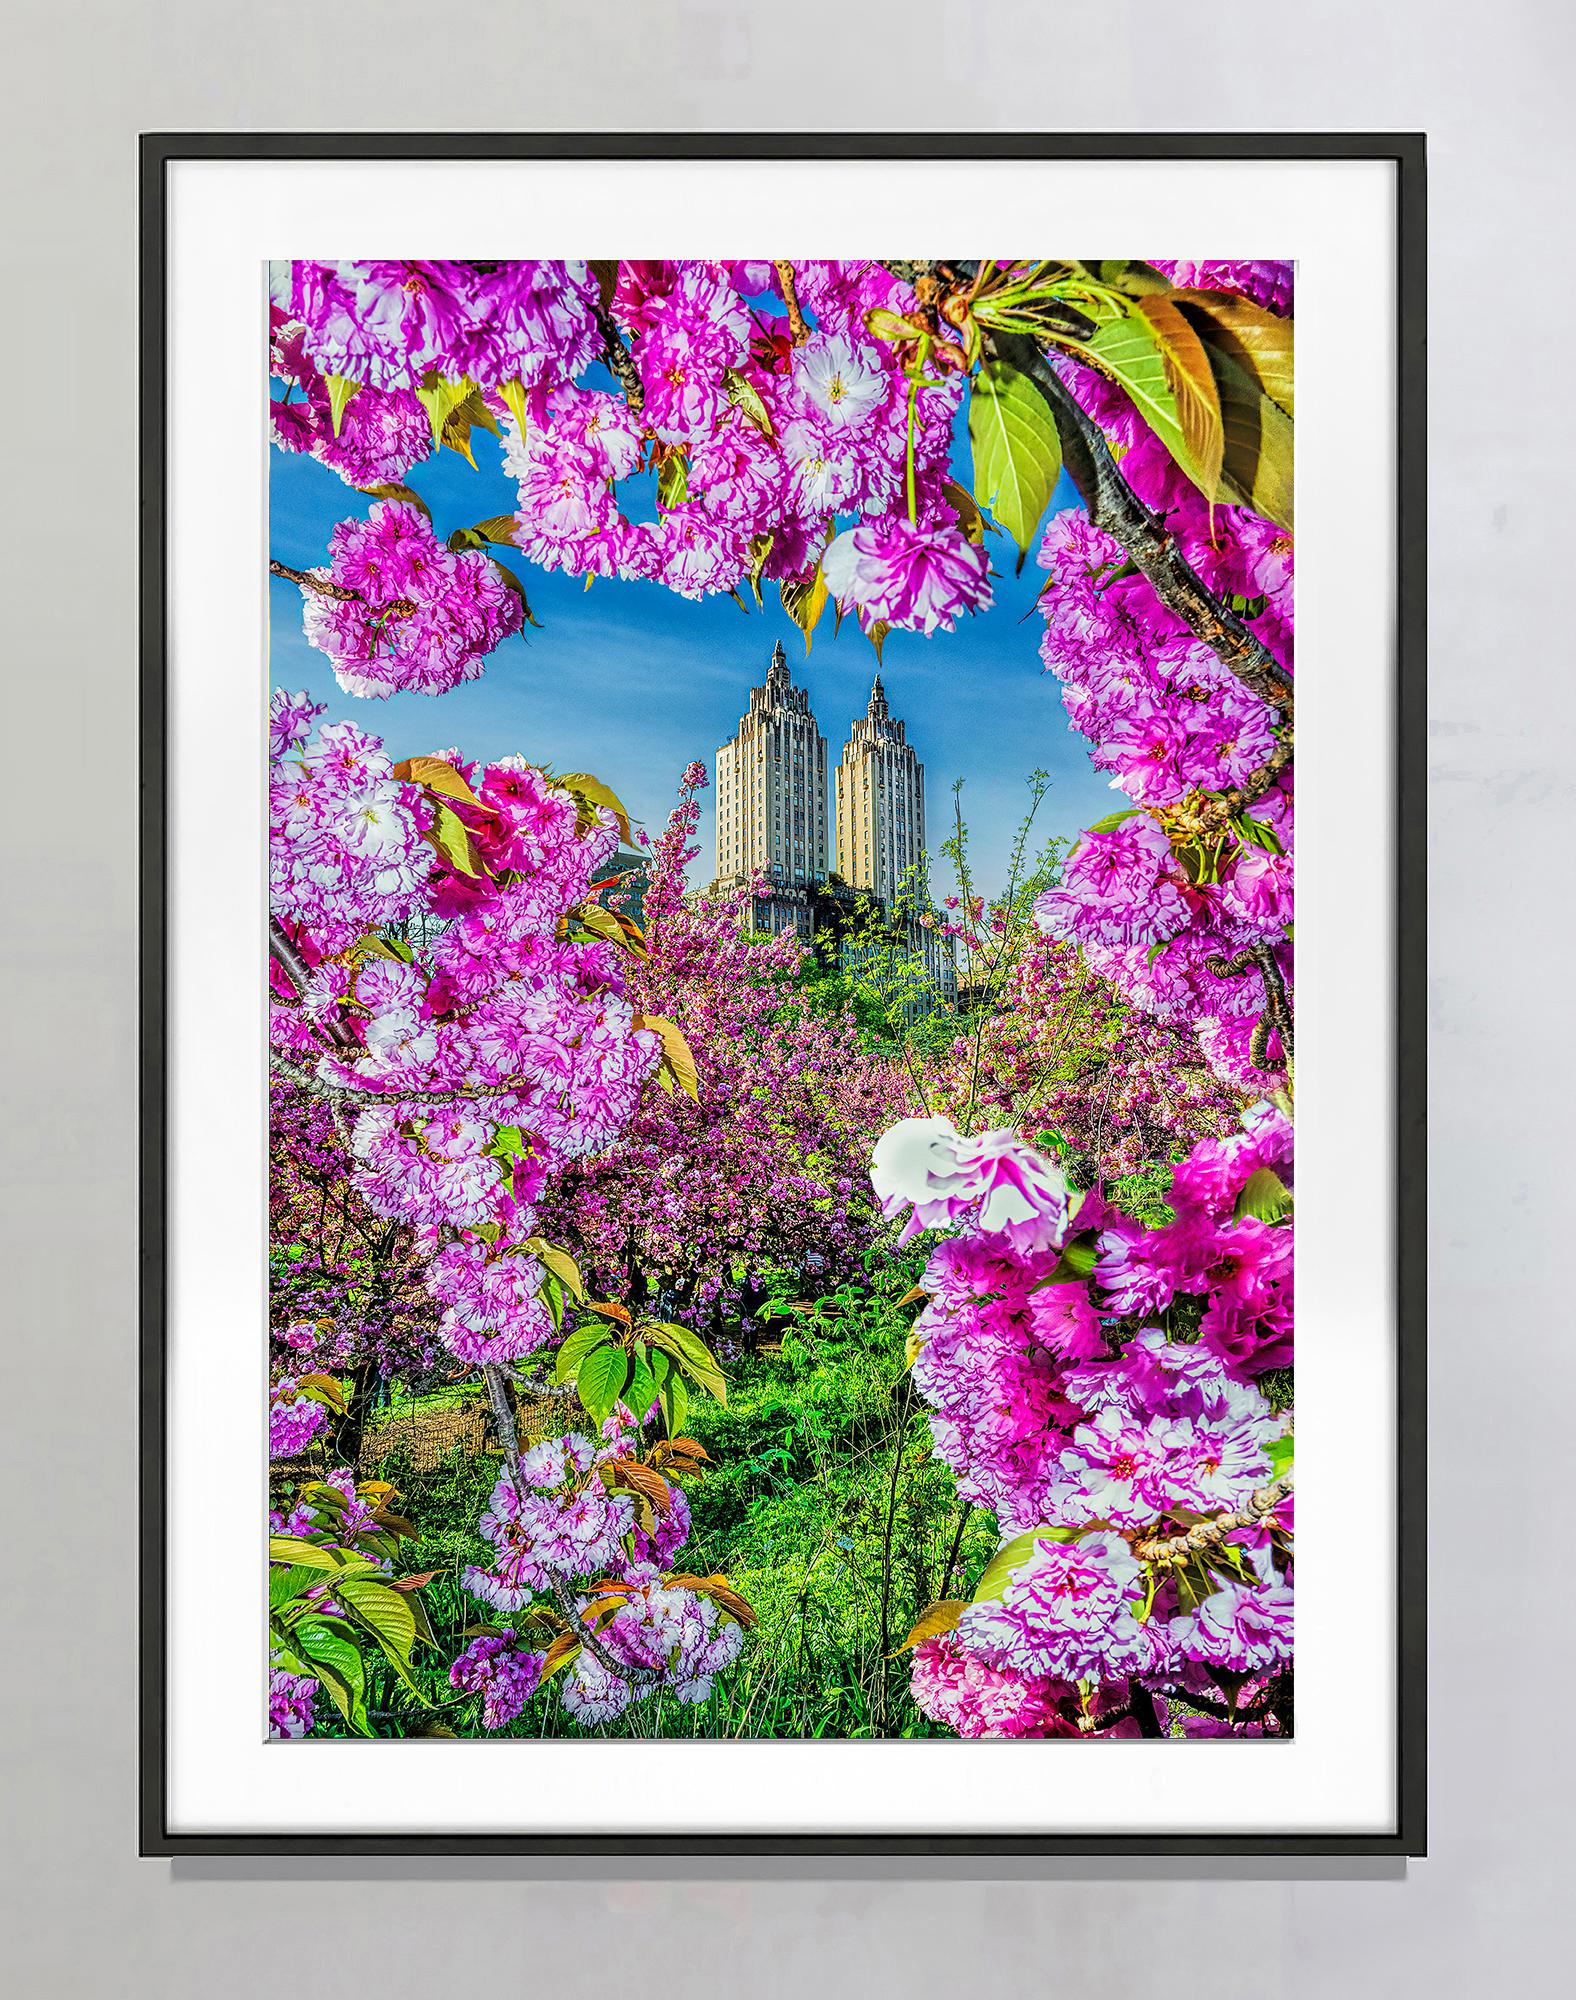 The San Remo Central Park West Framed by Cherry Blossoms Flowers - Contemporary Photograph by Mitchell Funk